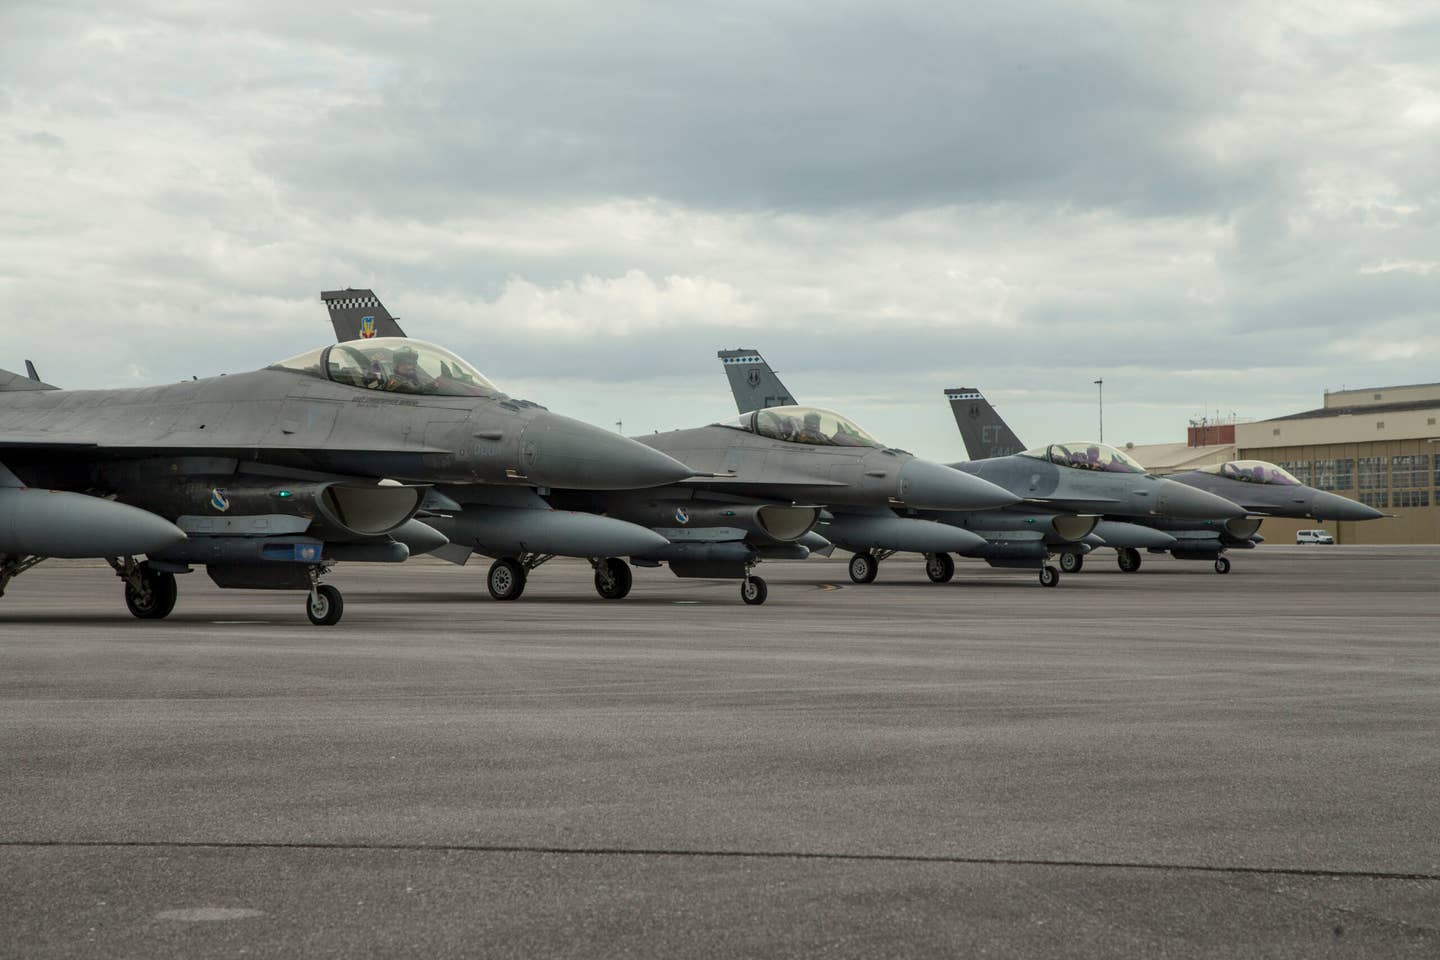 Four F-16 Fighting Falcons from the 96th Test Wing and the 53rd Wing stand ready for takeoff at Eglin Air Force Base, Fla., July 2, 2020. <em>Credit: U.S. Air Force photo by Master Sgt. Tristan McIntire</em>